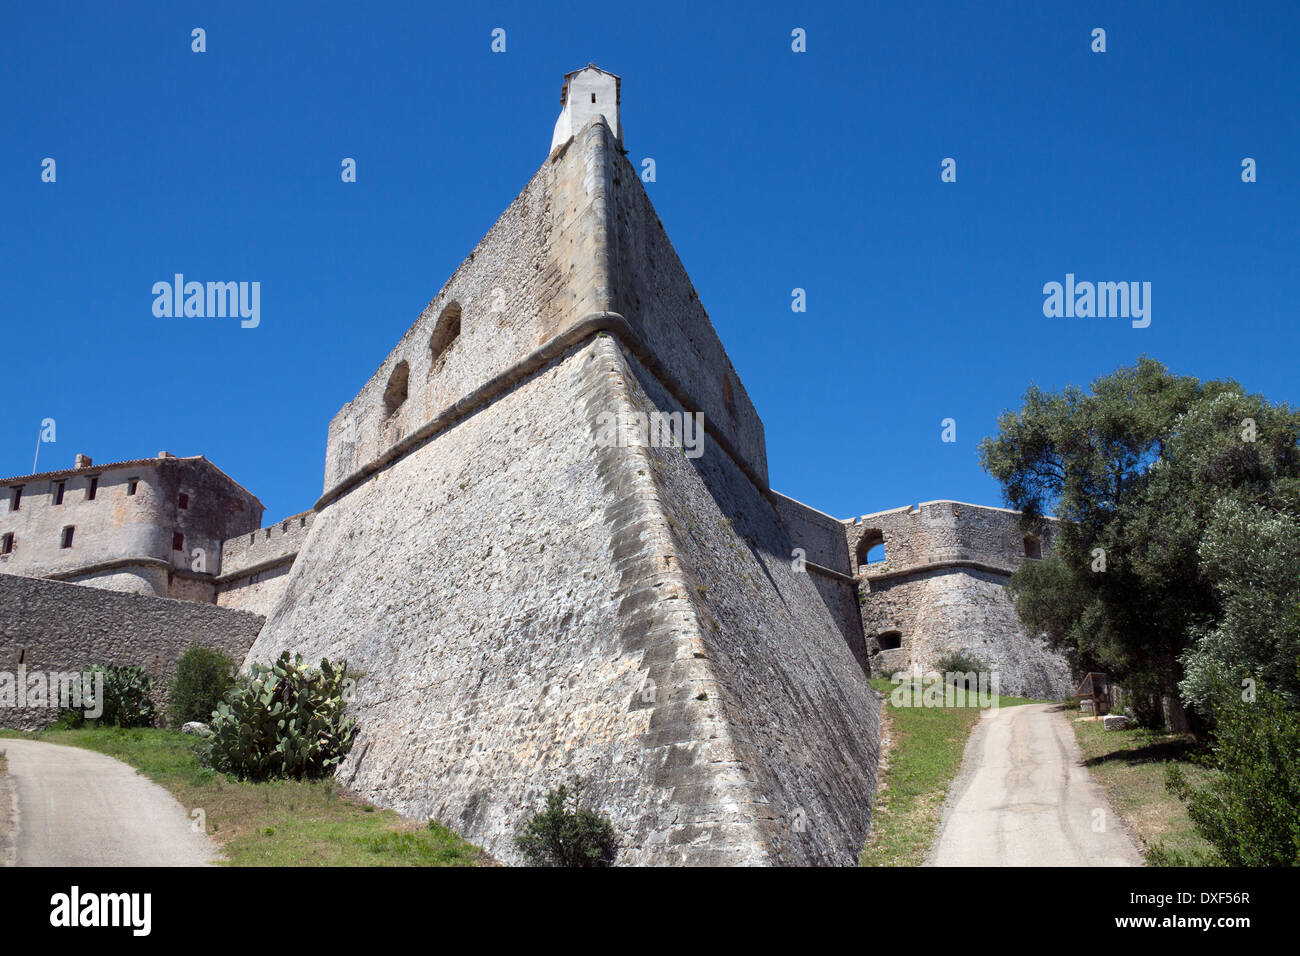 The old medieval castle at Antibes on the French Riviera in the South of France. Stock Photo